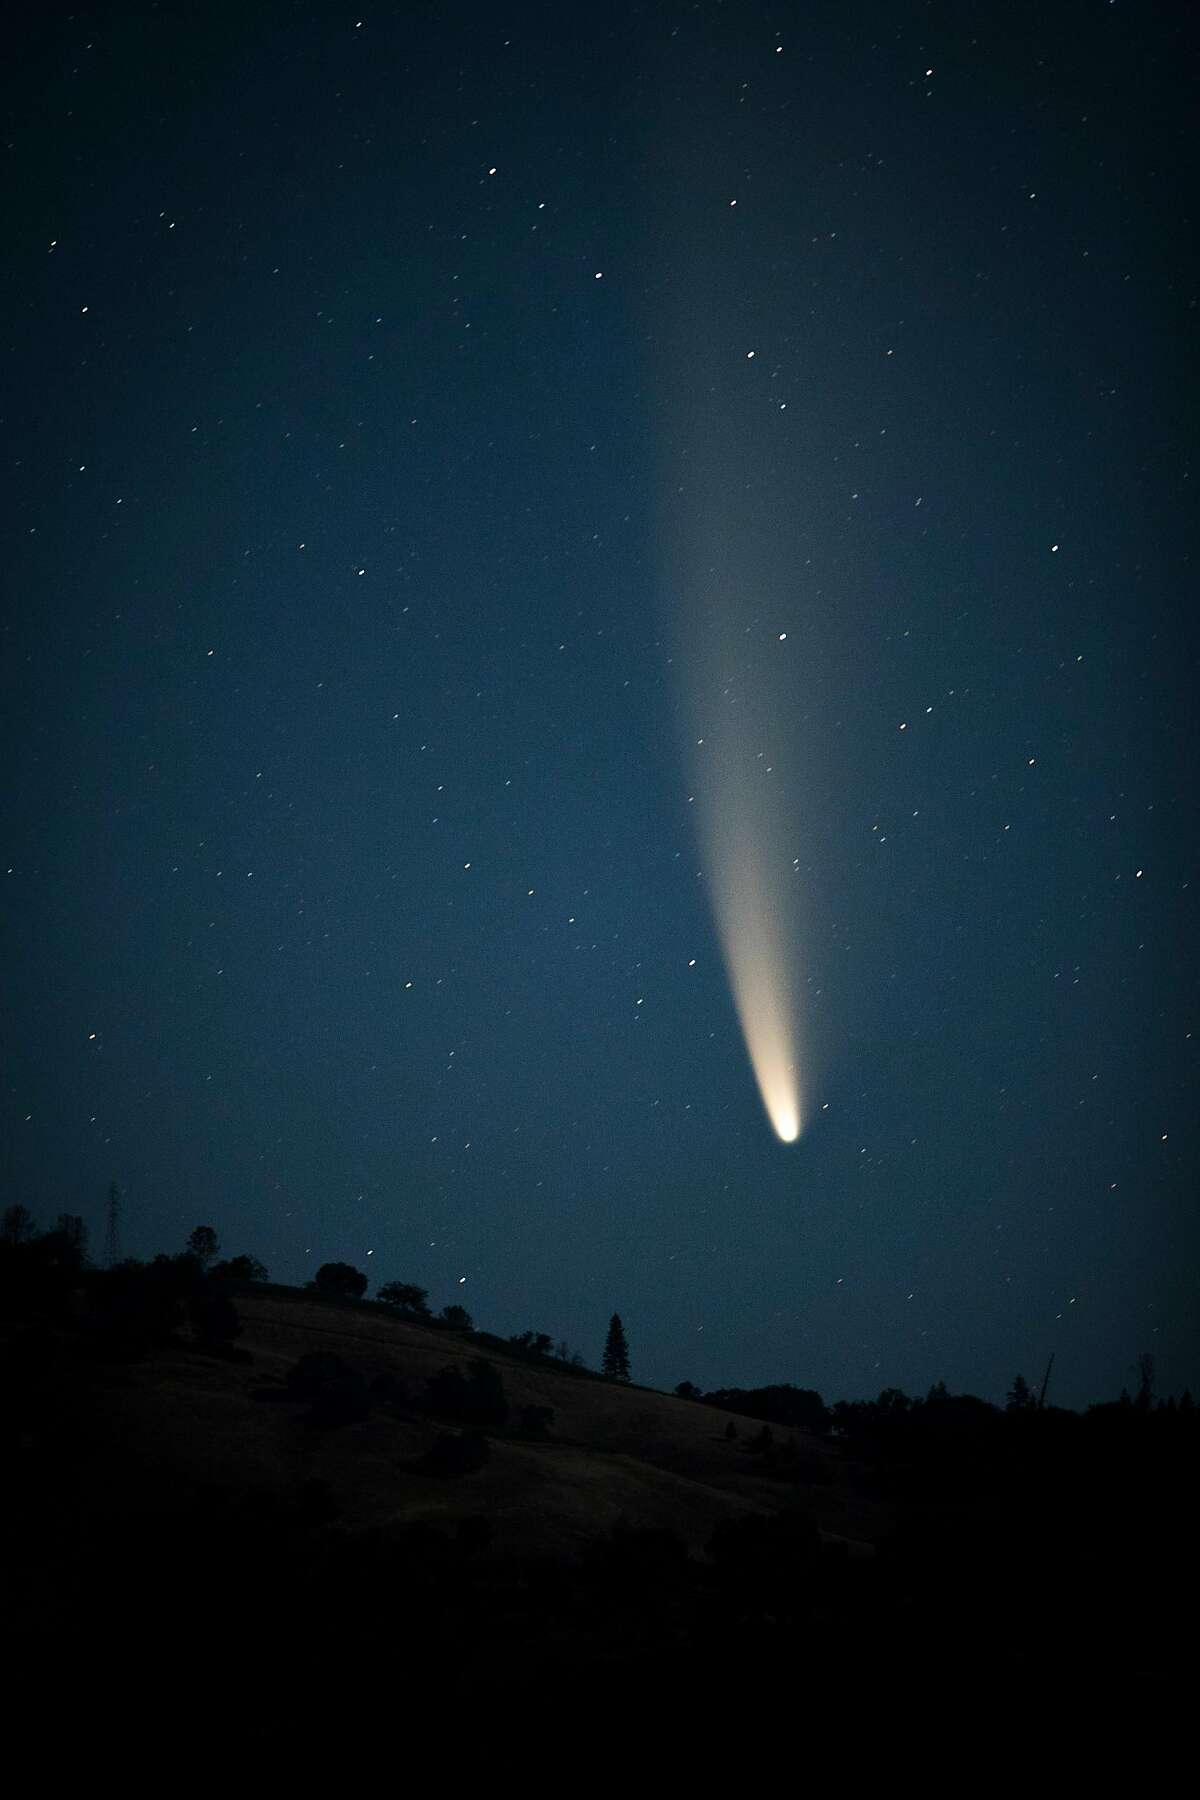 The comet C/2020 F3 (NEOWISE) rises over Clear Lake as seen from Soda Bay Road outside Clear Lake, Calif., on Sunday, July 12, 2020. The comet, only recently discovered, will not return to earth for another approximately 6800 years.